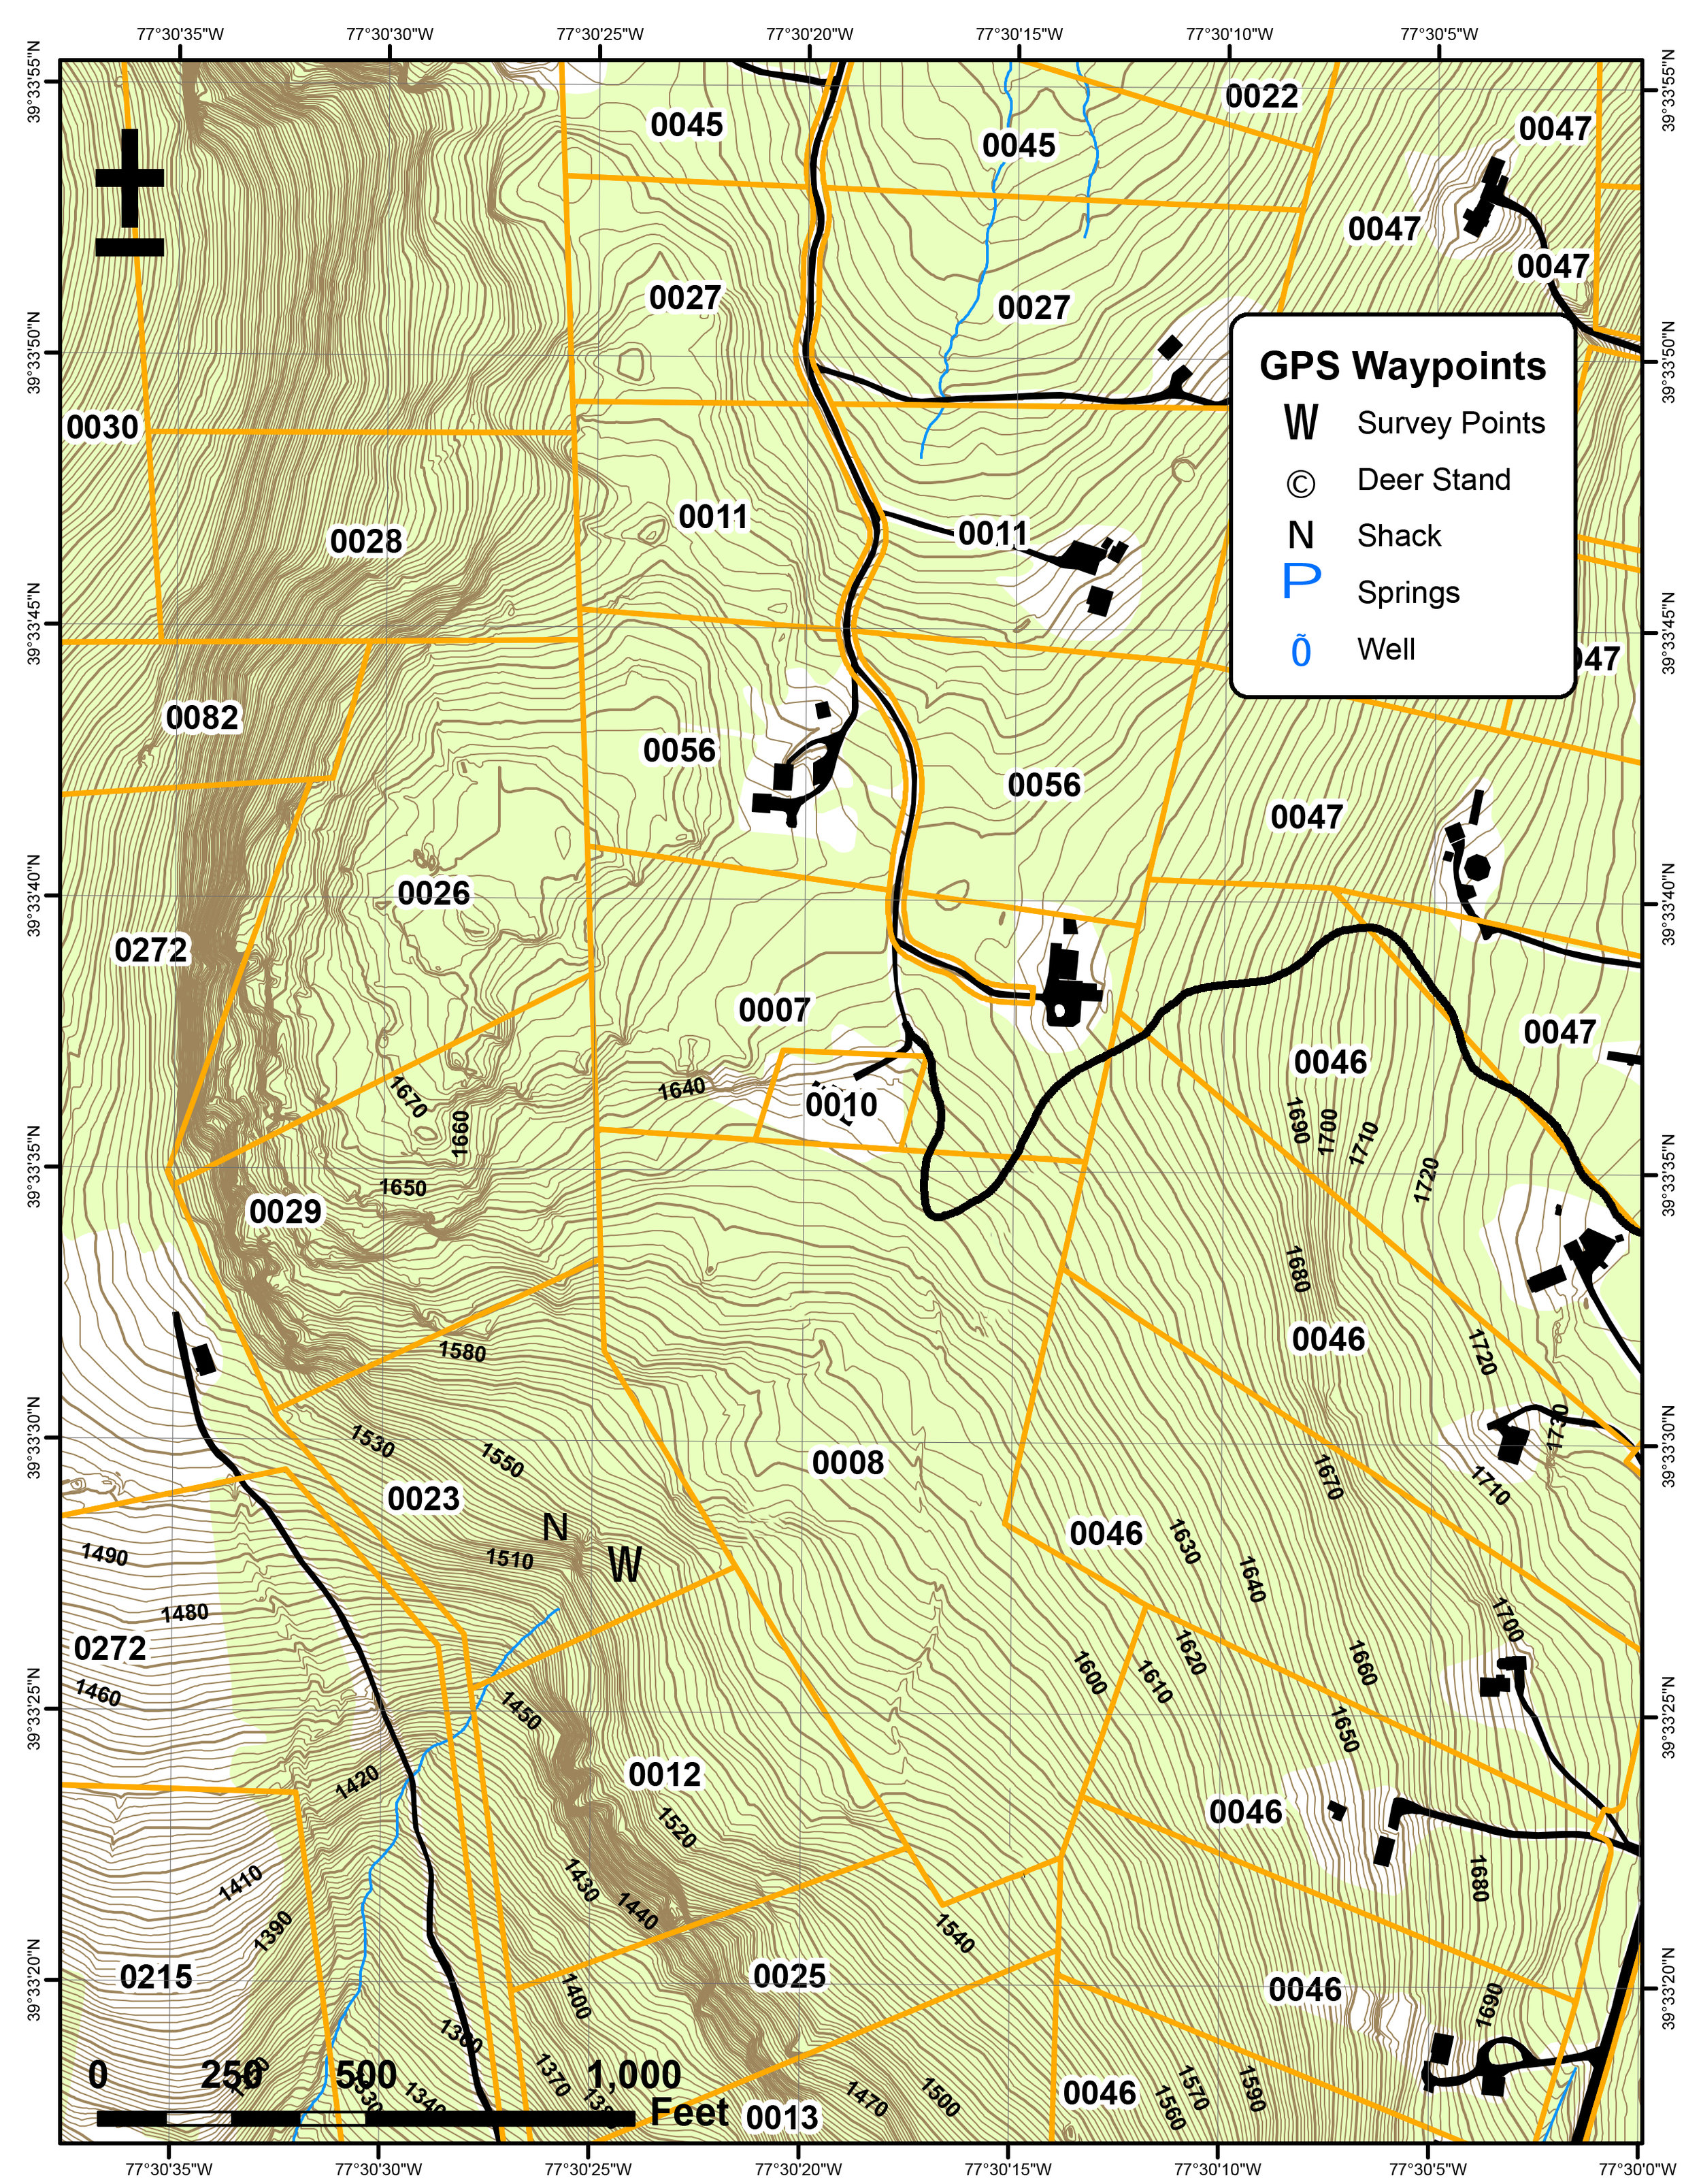 Five Forks Topo Property Layout (Area).jpg